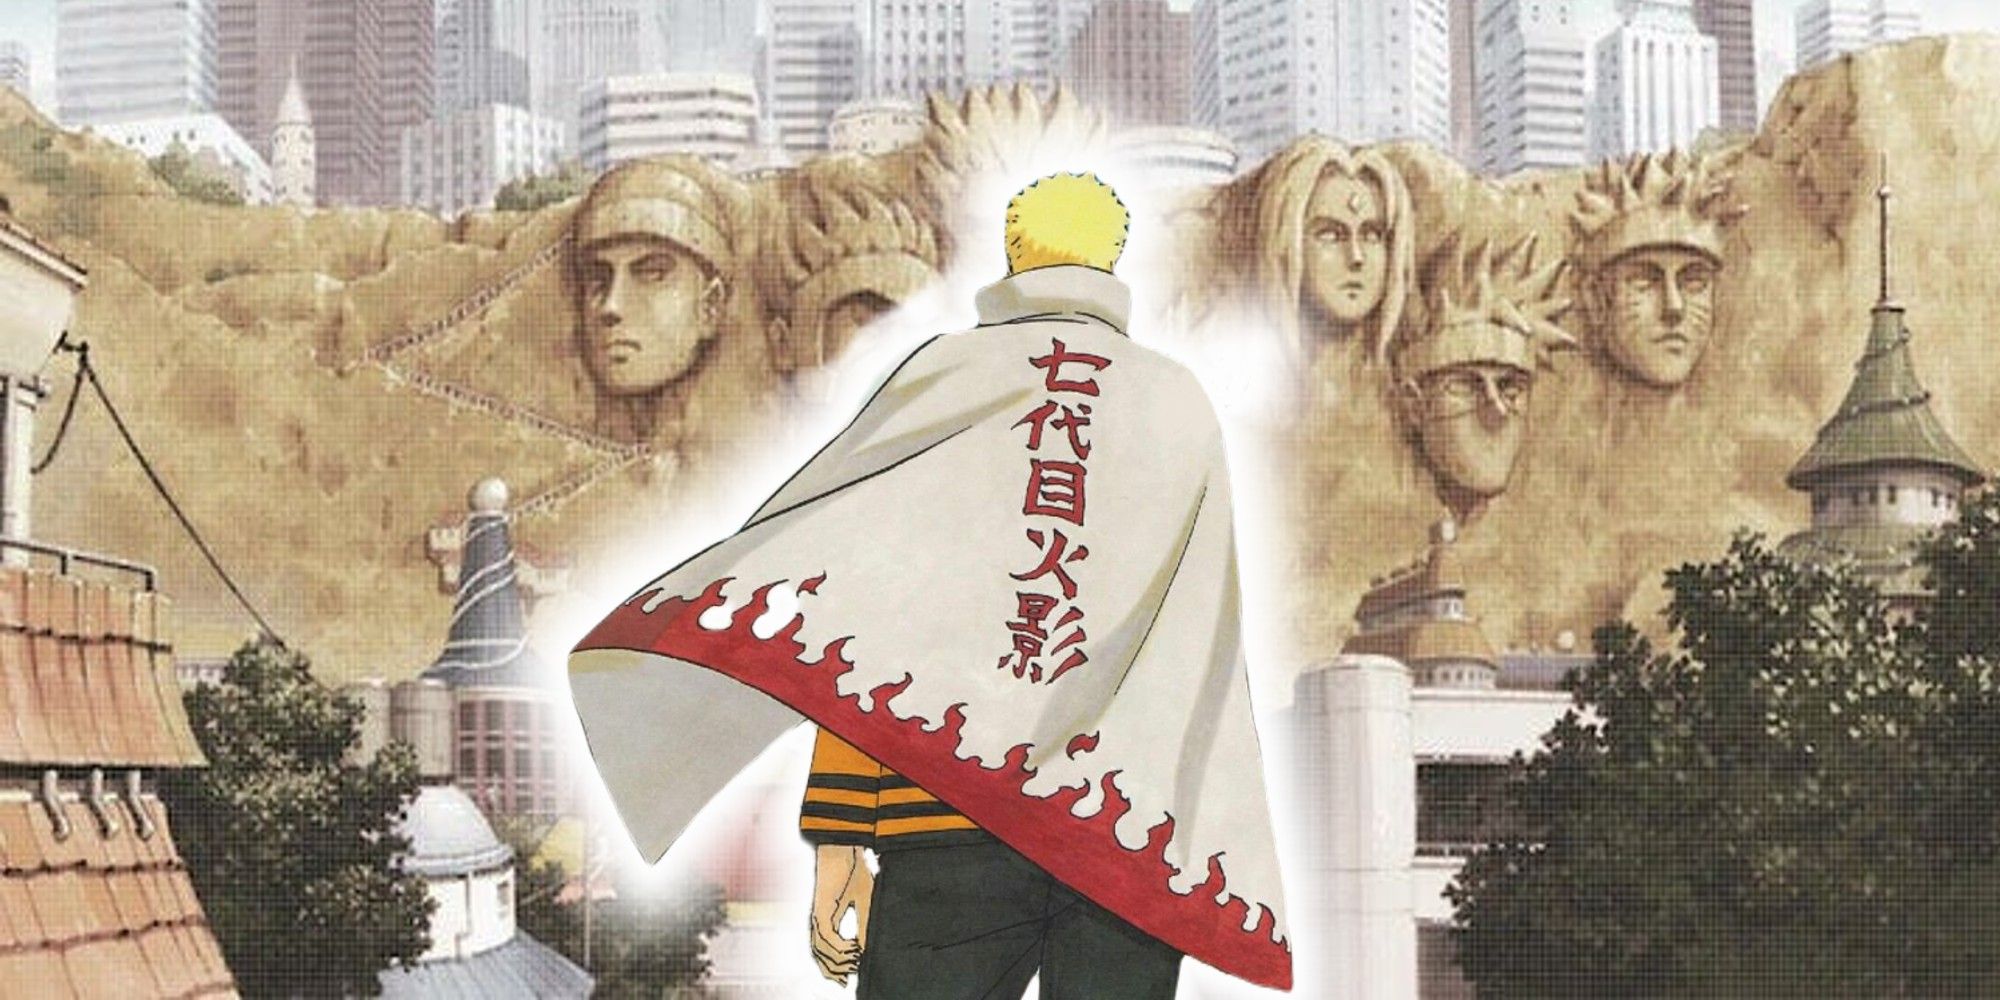 Image of Naruto looking over at the Hokage Stone Face statues